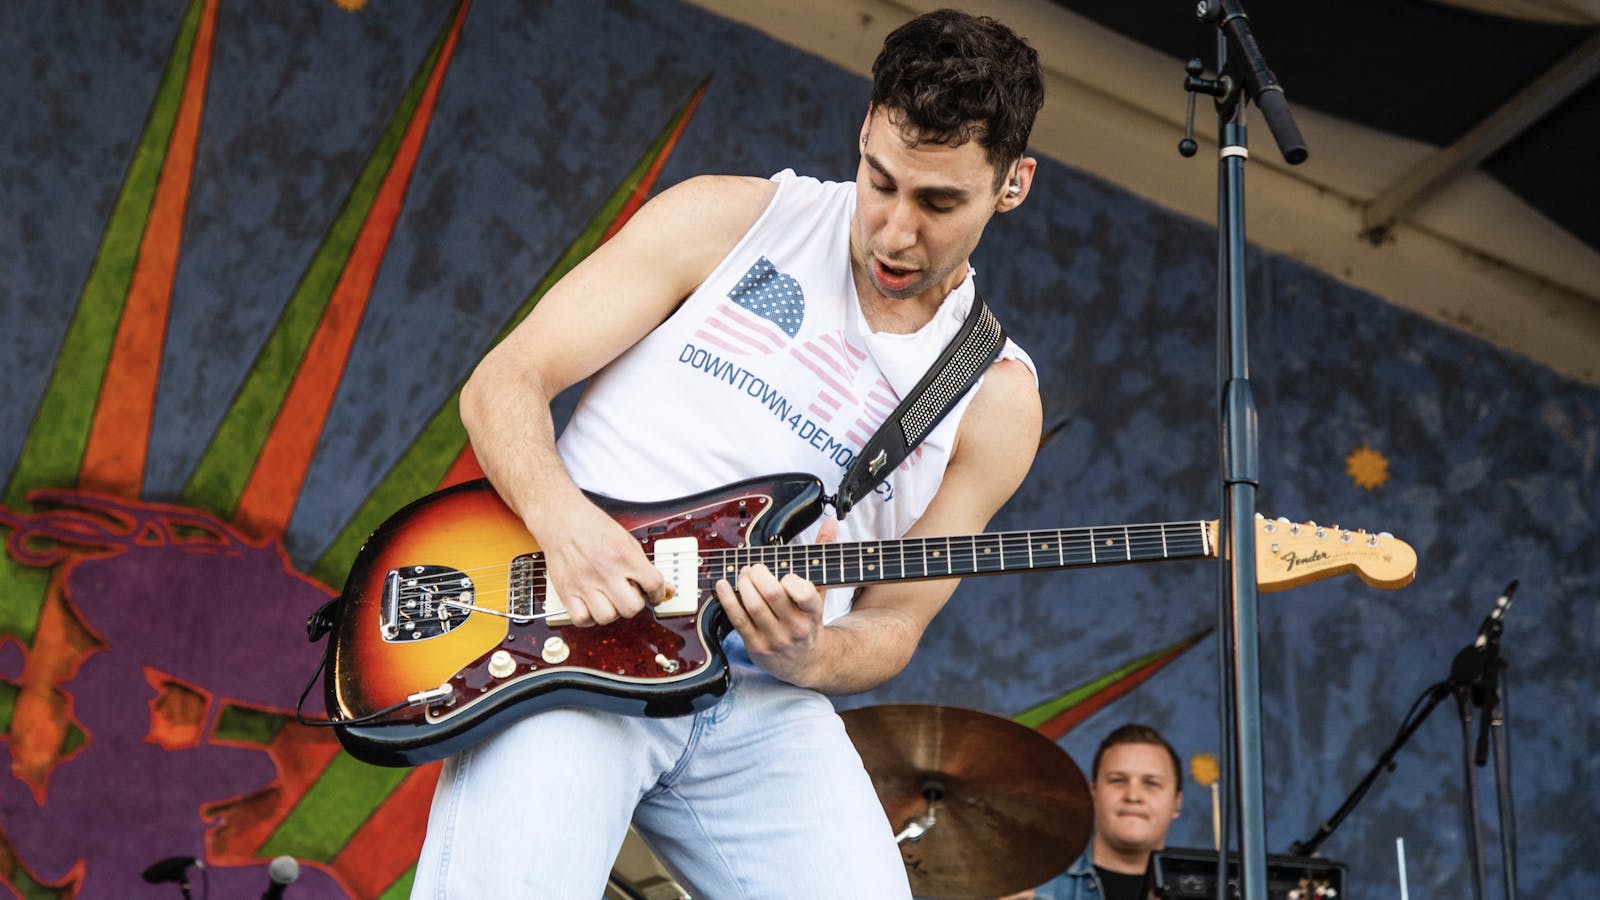 Jack Antonoff of Bleachers performing at the New Orleans Jazz and Heritage Festival in 2019. Photo by AP